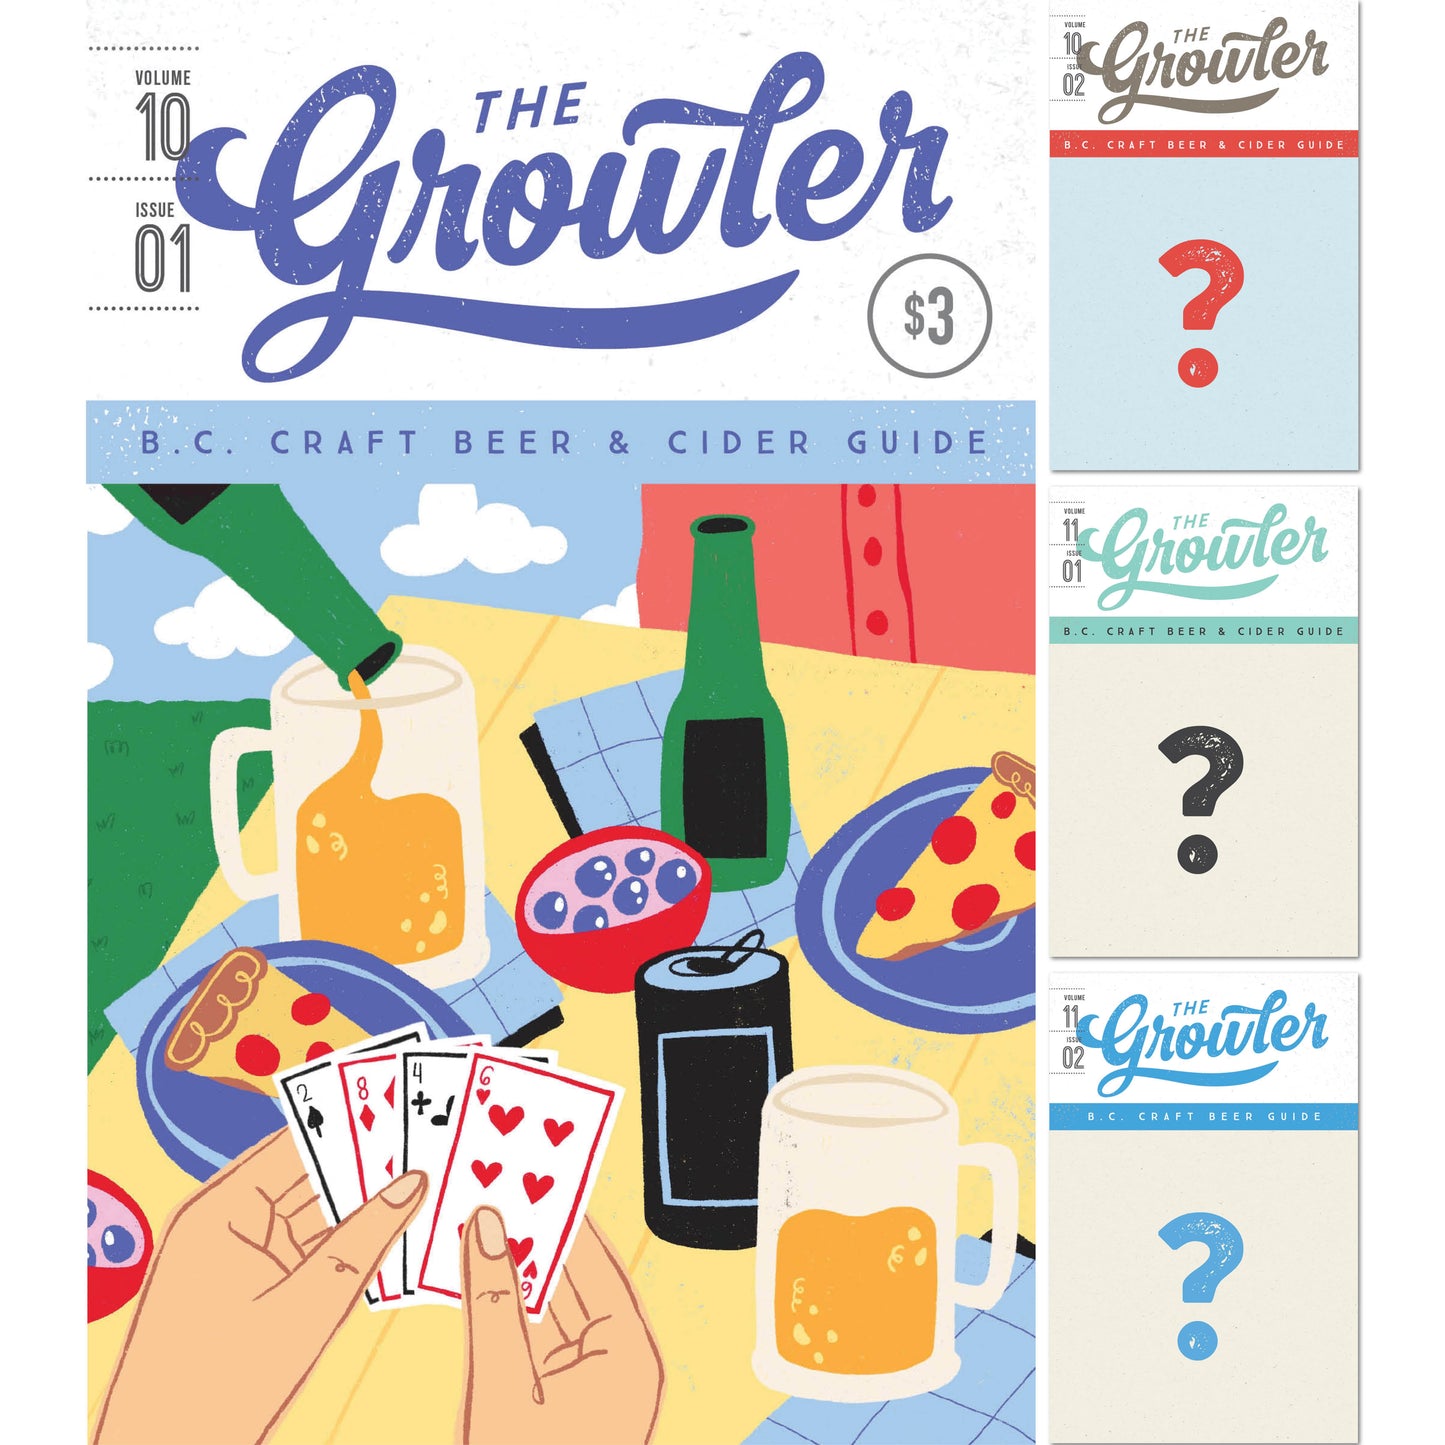 The Growler B.C. Four-Issue Subscription